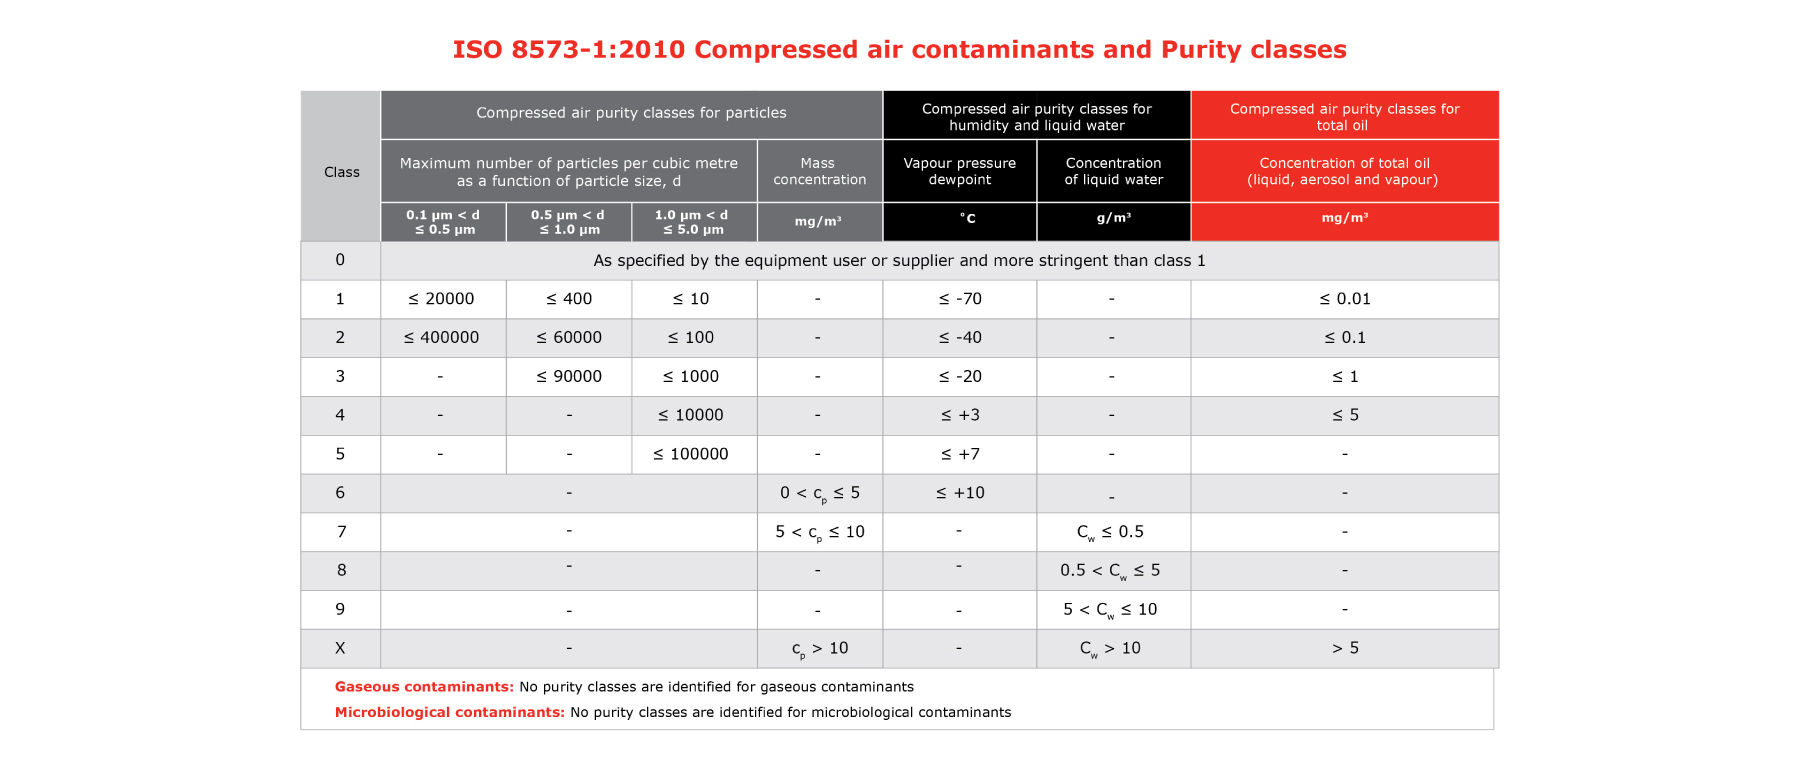 How to remove contaminants from your compressed air system?